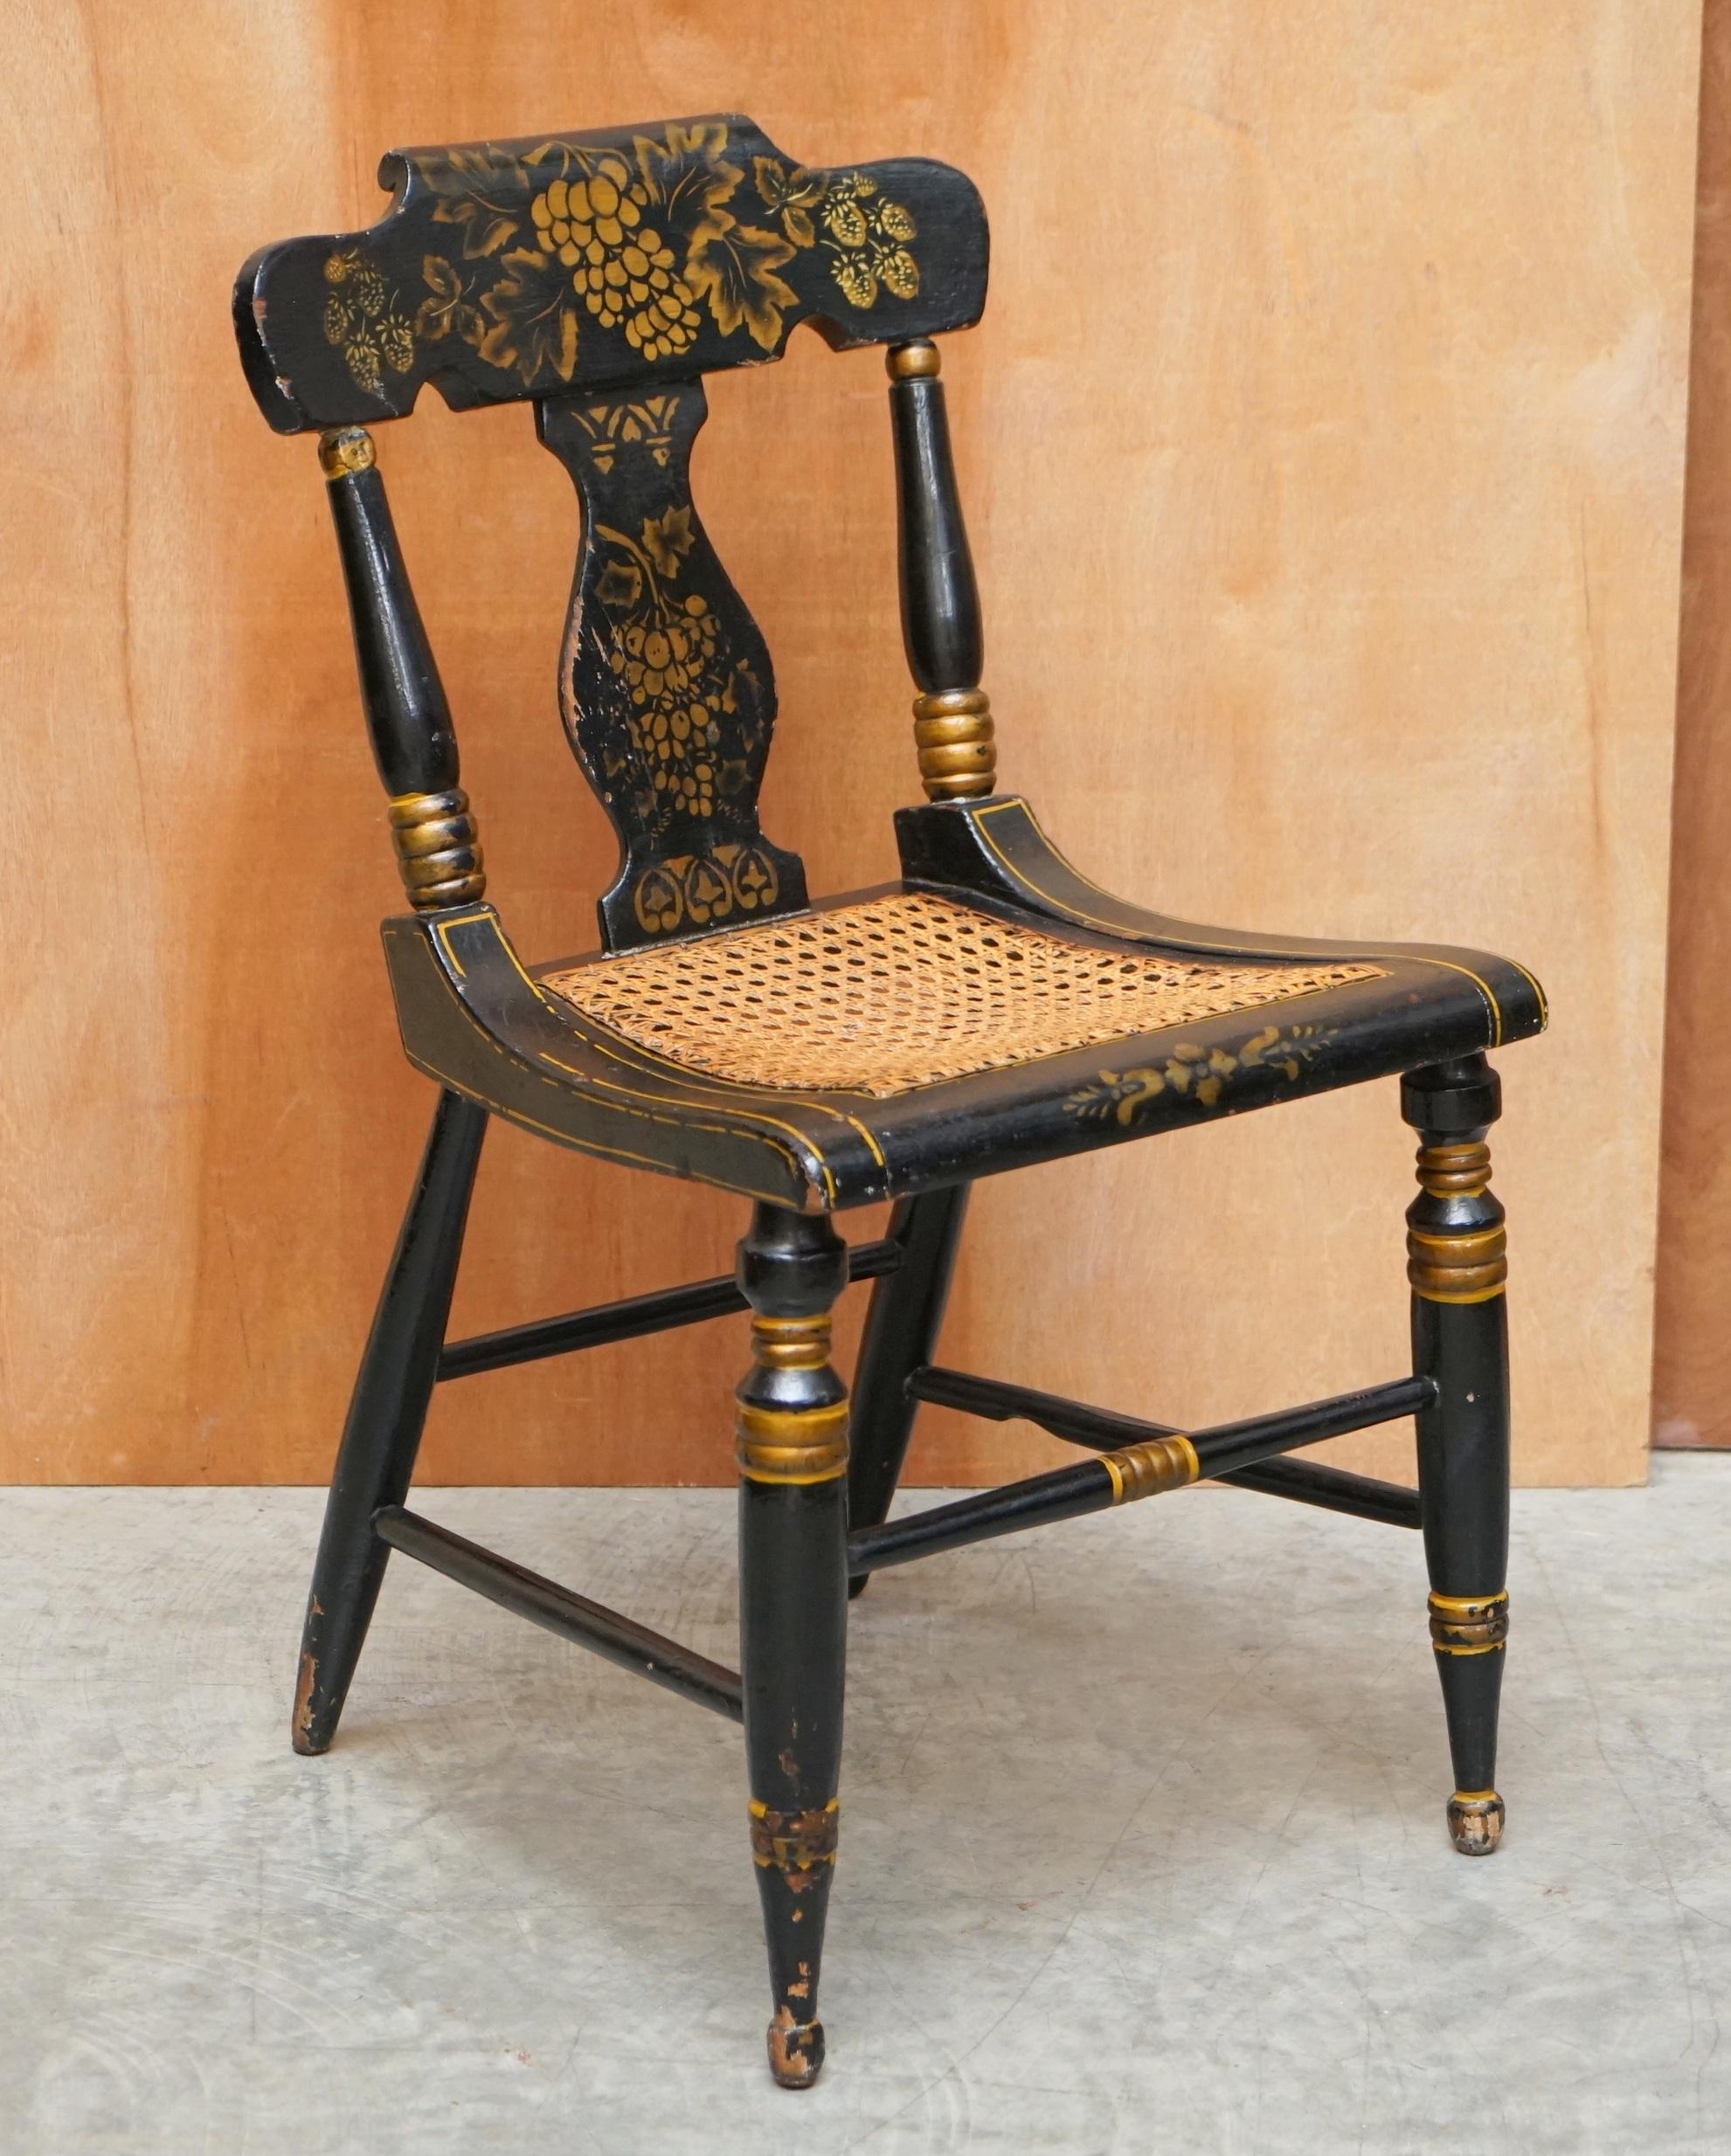 We are delighted to offer this stunning pair of original circa 1825 ebonised and gold gilt hand painted baltimore side chairs

A highly collectable and well made pair of side chairs, if you are looking at this listing then chances are you know how